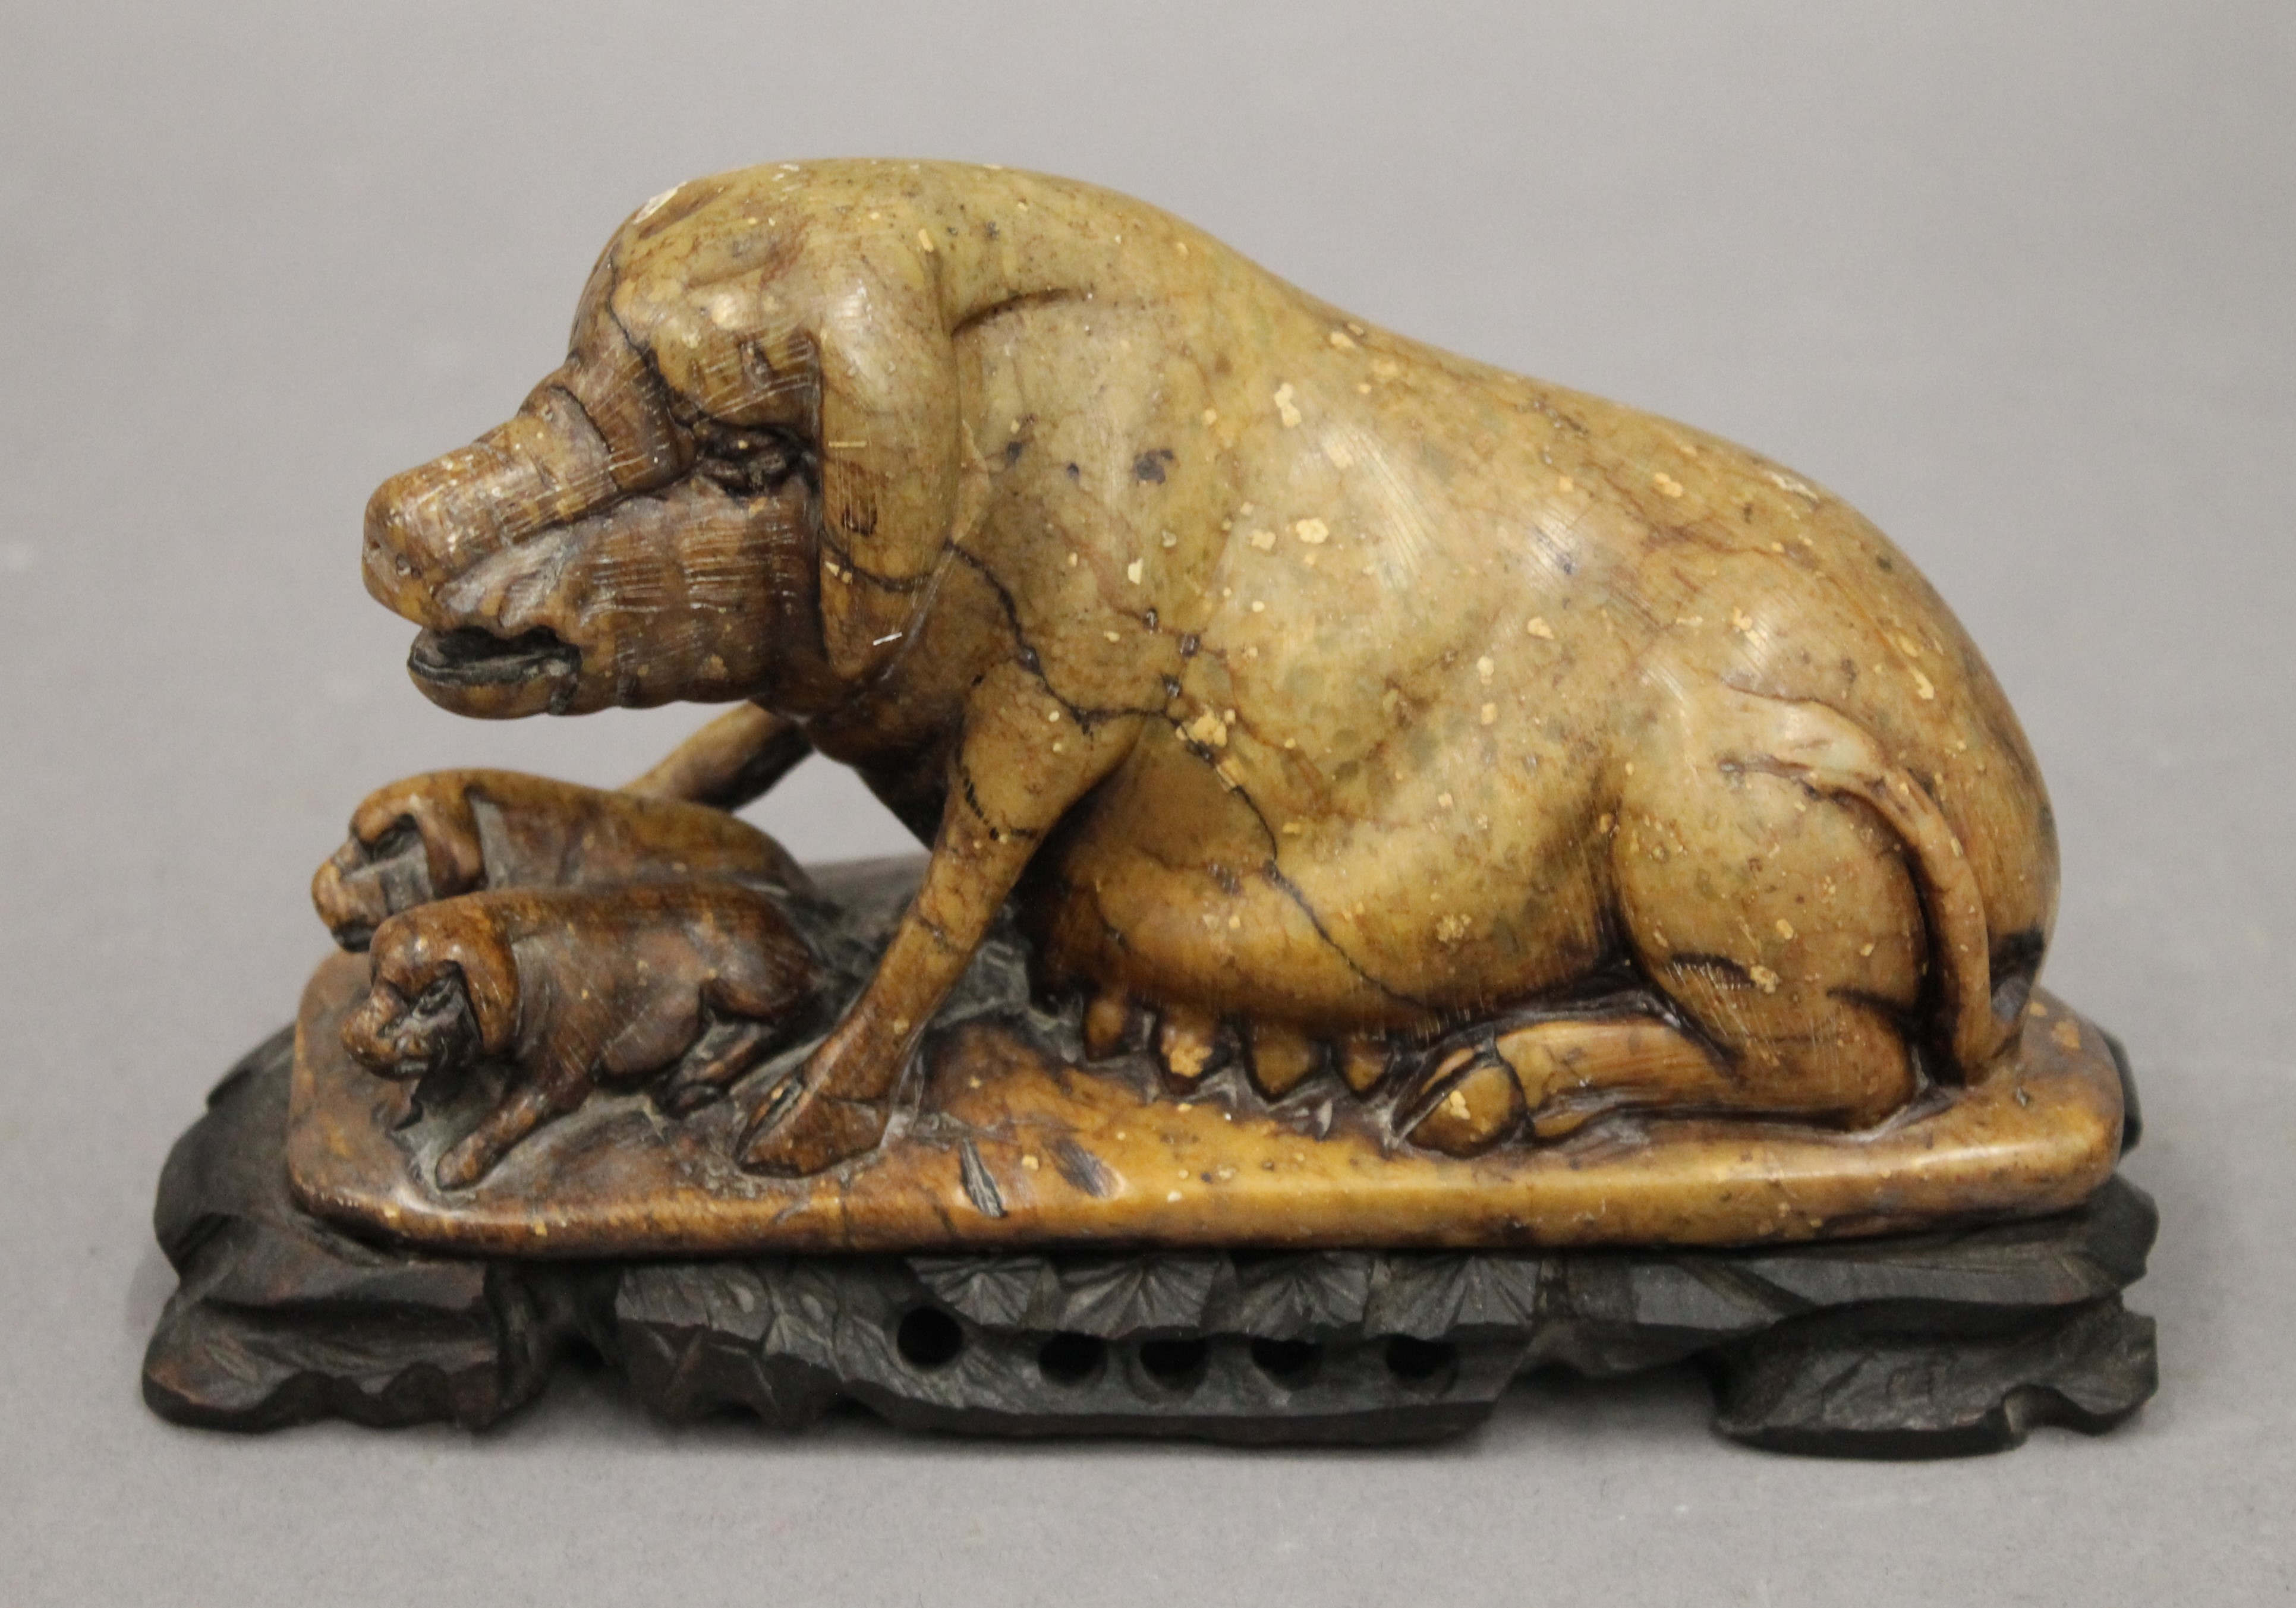 A Chinese soapstone carving of a sow and piglets, mounted on a wooden stand. 17 cm long overall.